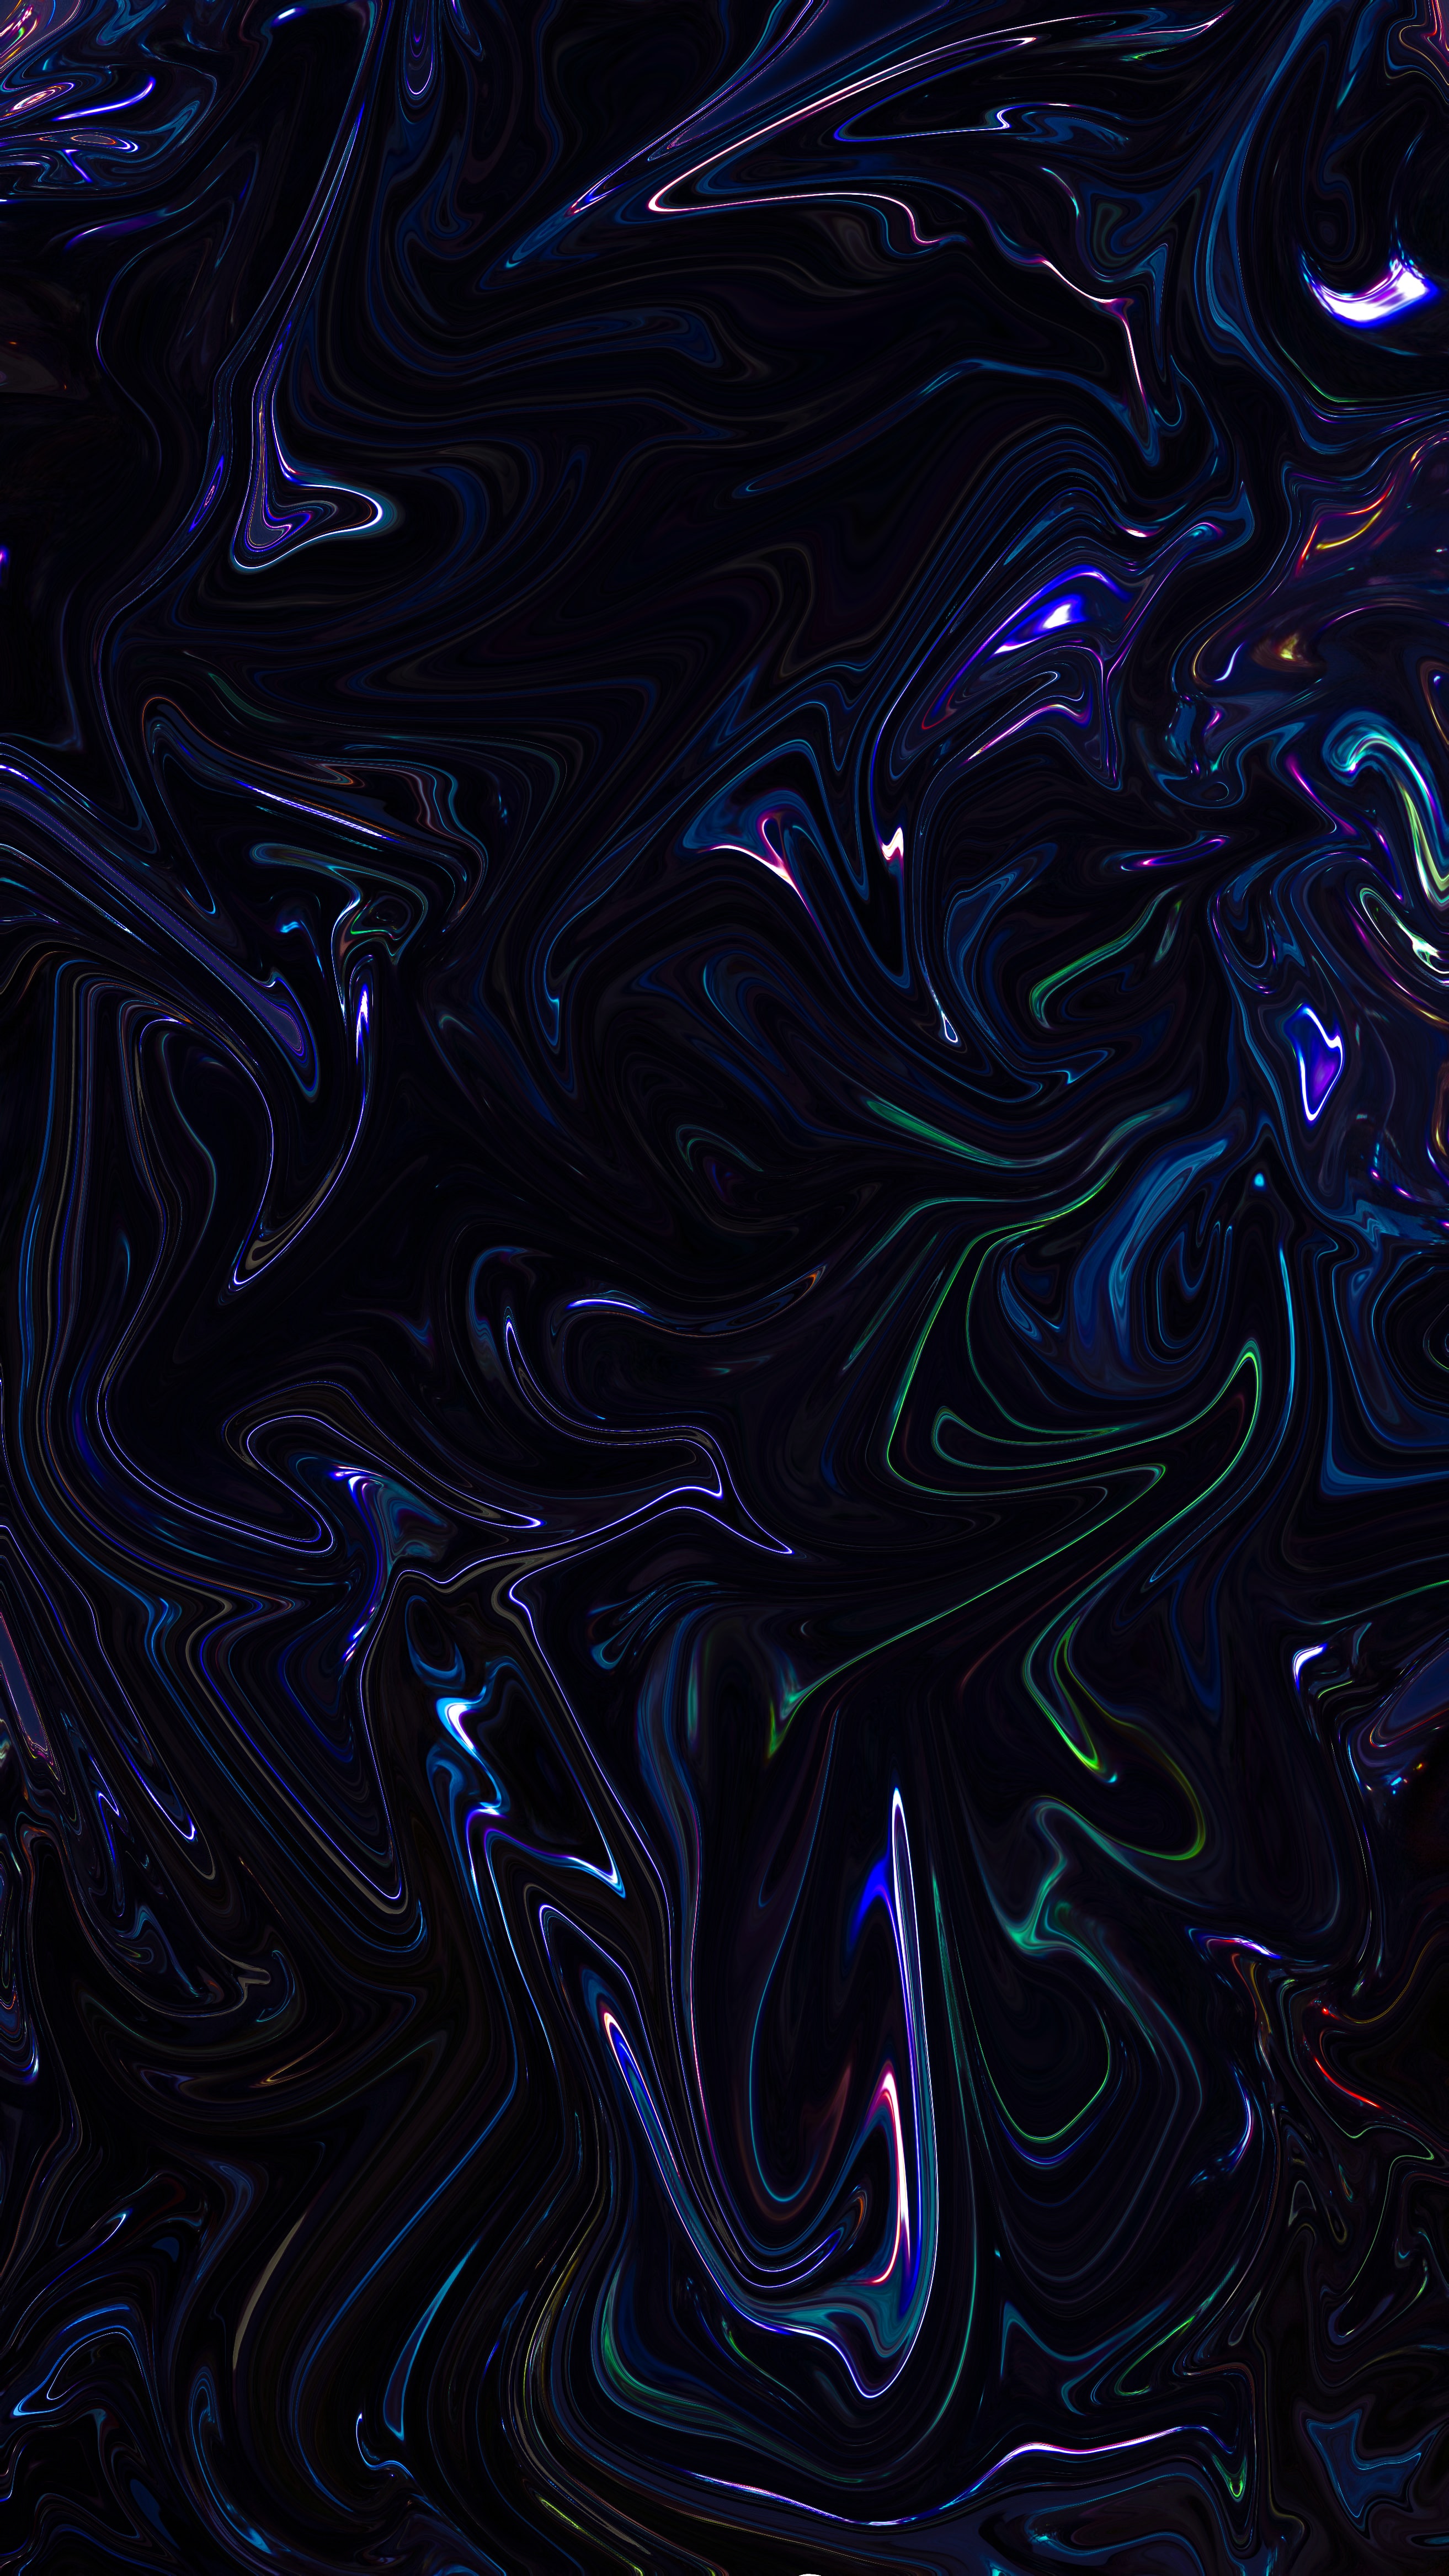 1080p pic viscous, abstract, thick